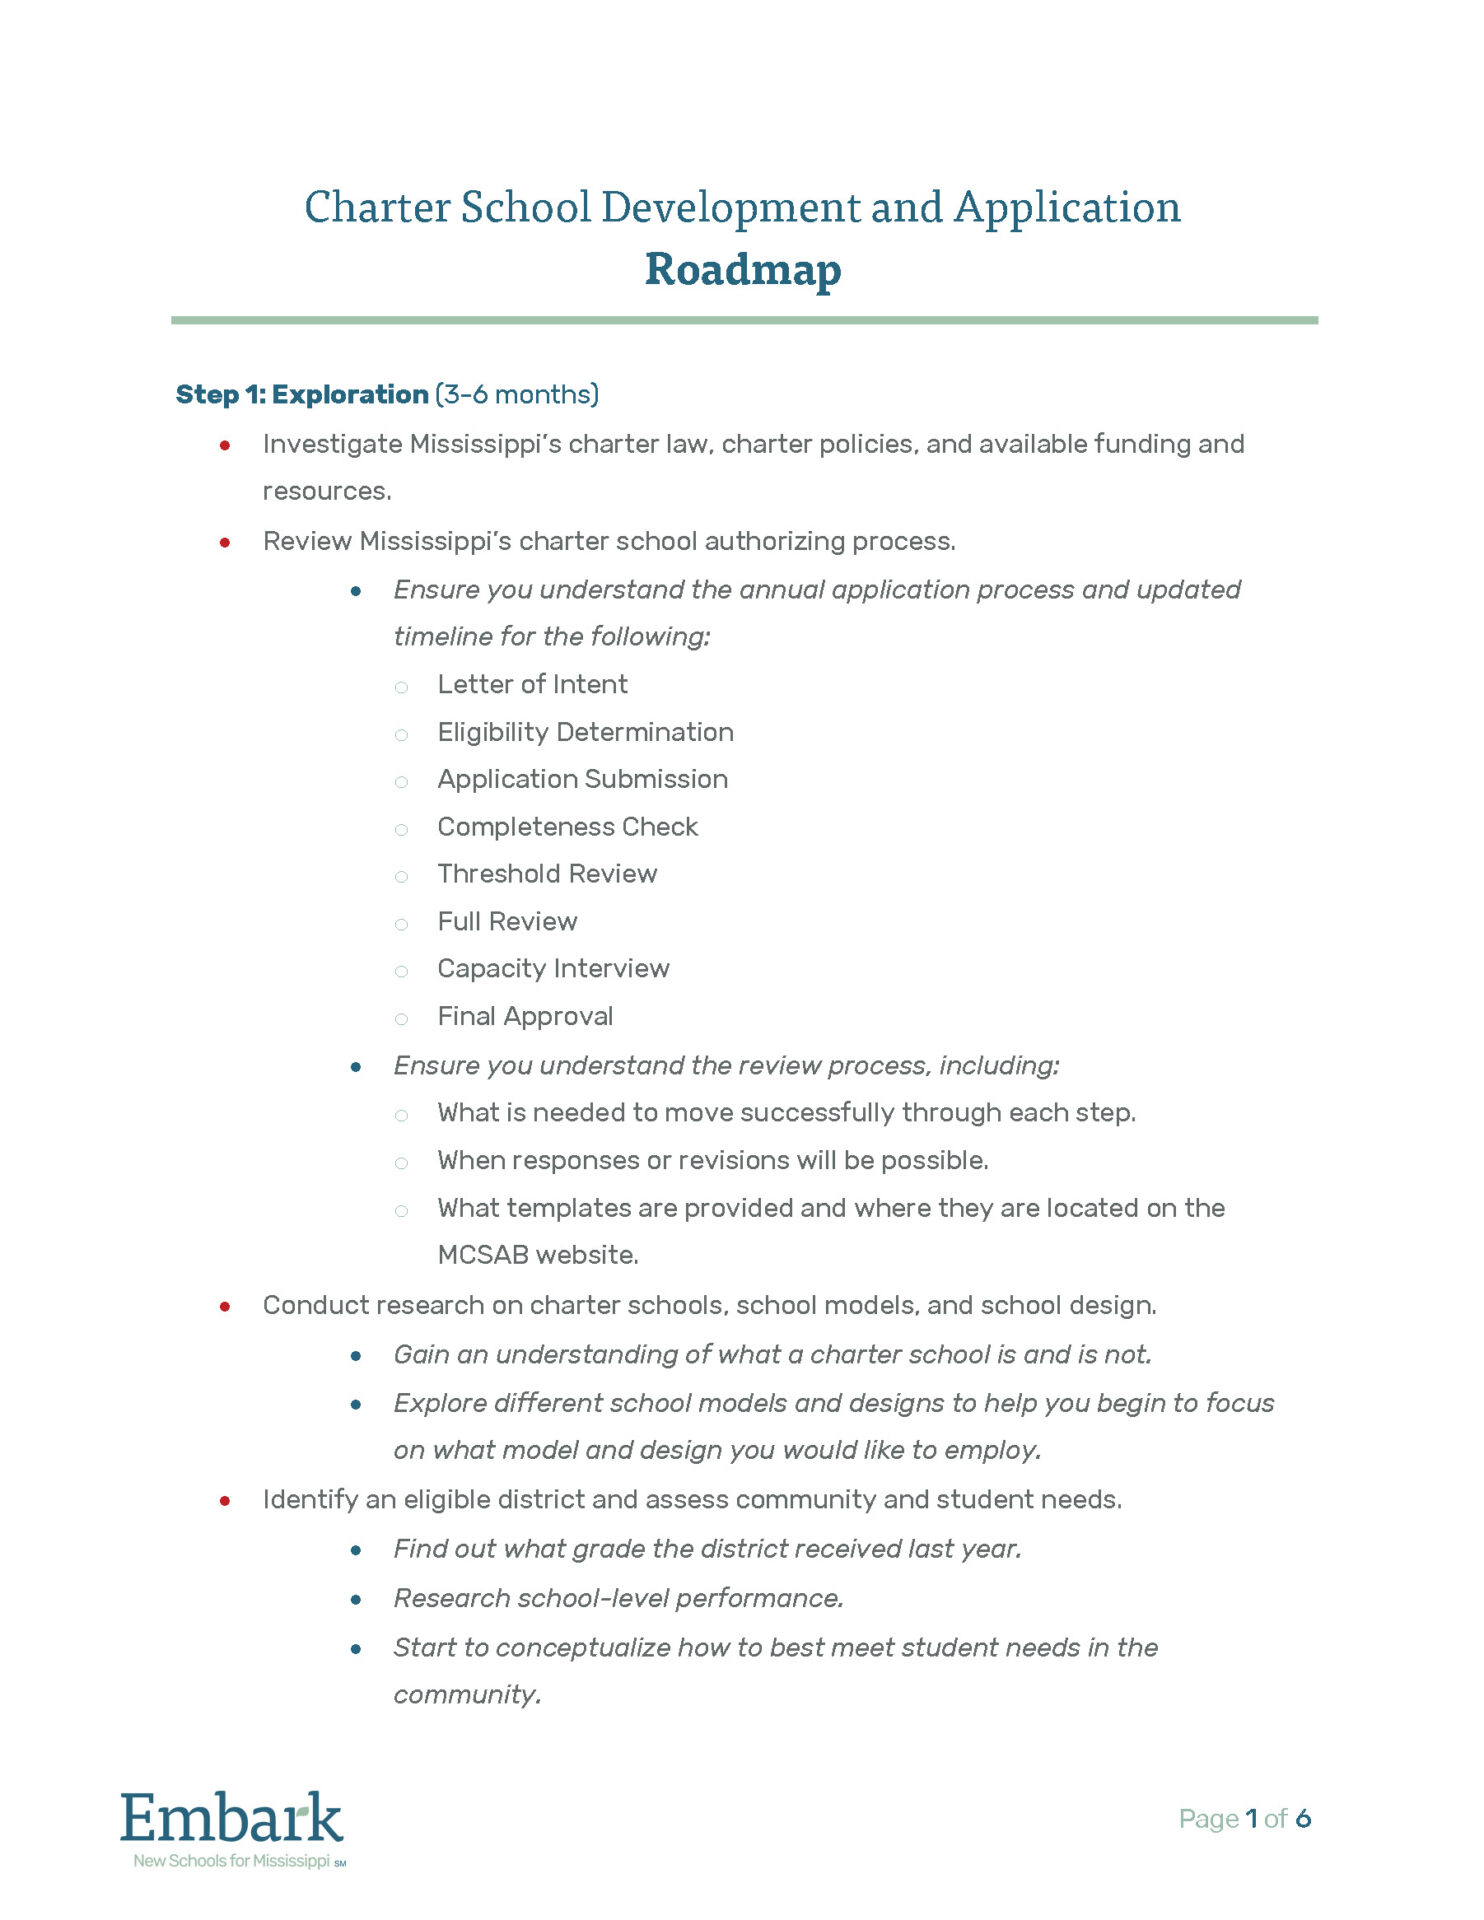 Charter School Development and Application Roadmap_Page_1